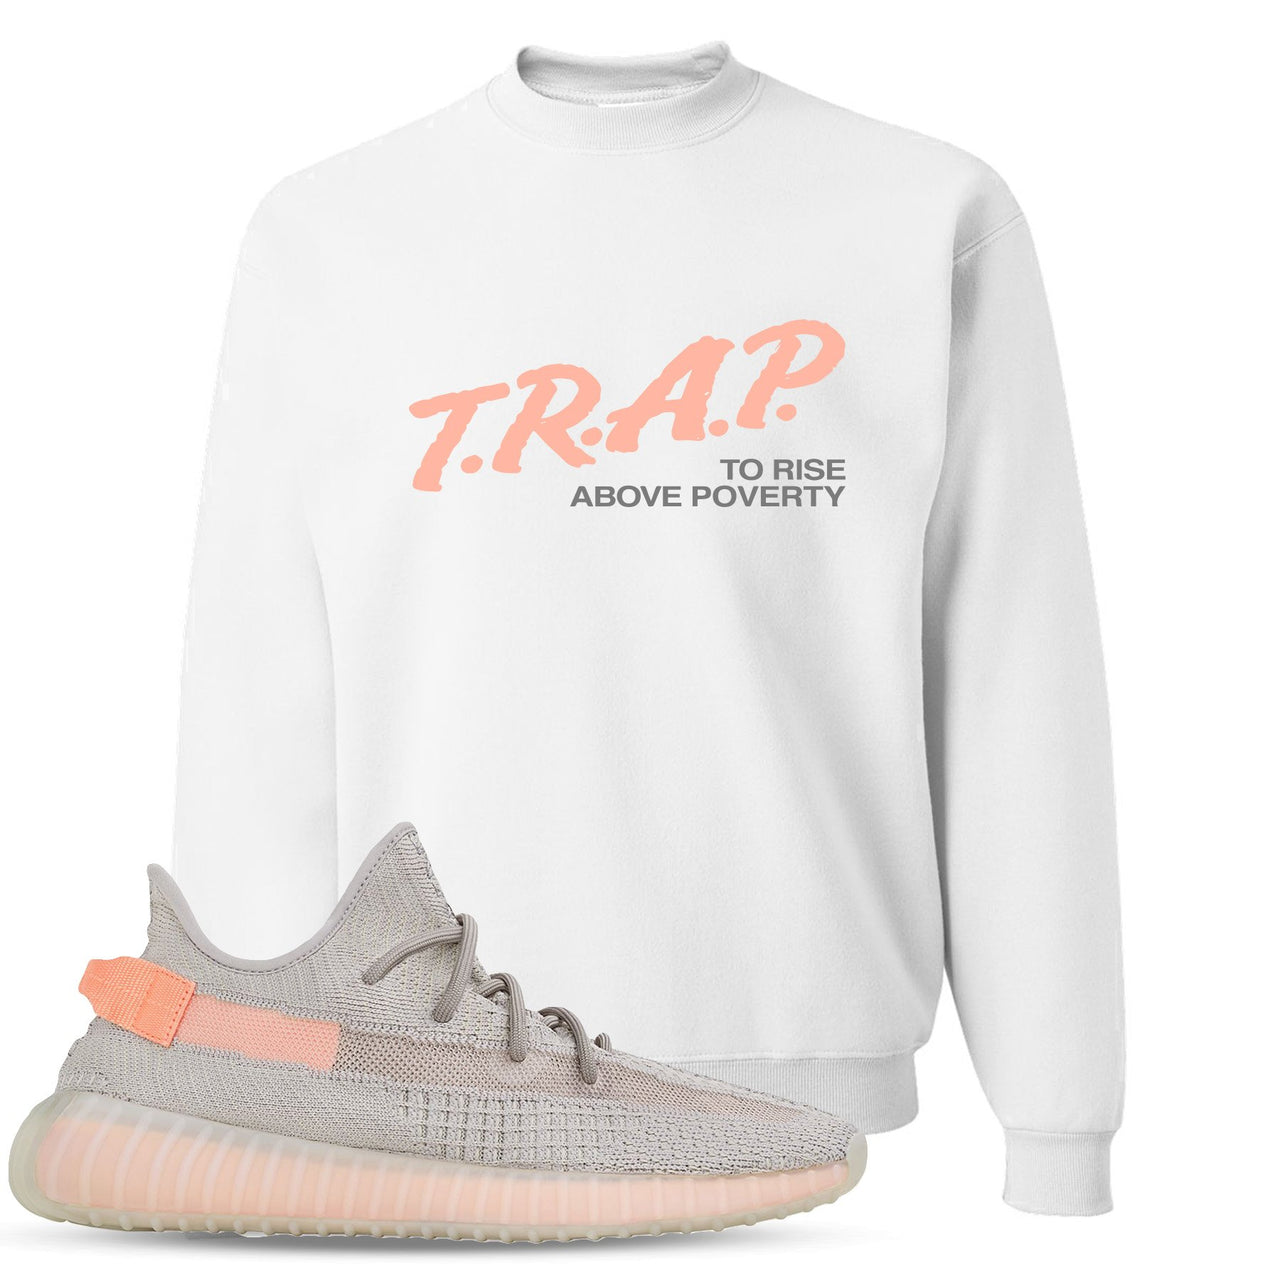 True Form v2 350s Crewneck Sweater | Trap To Rise Above Poverty, White